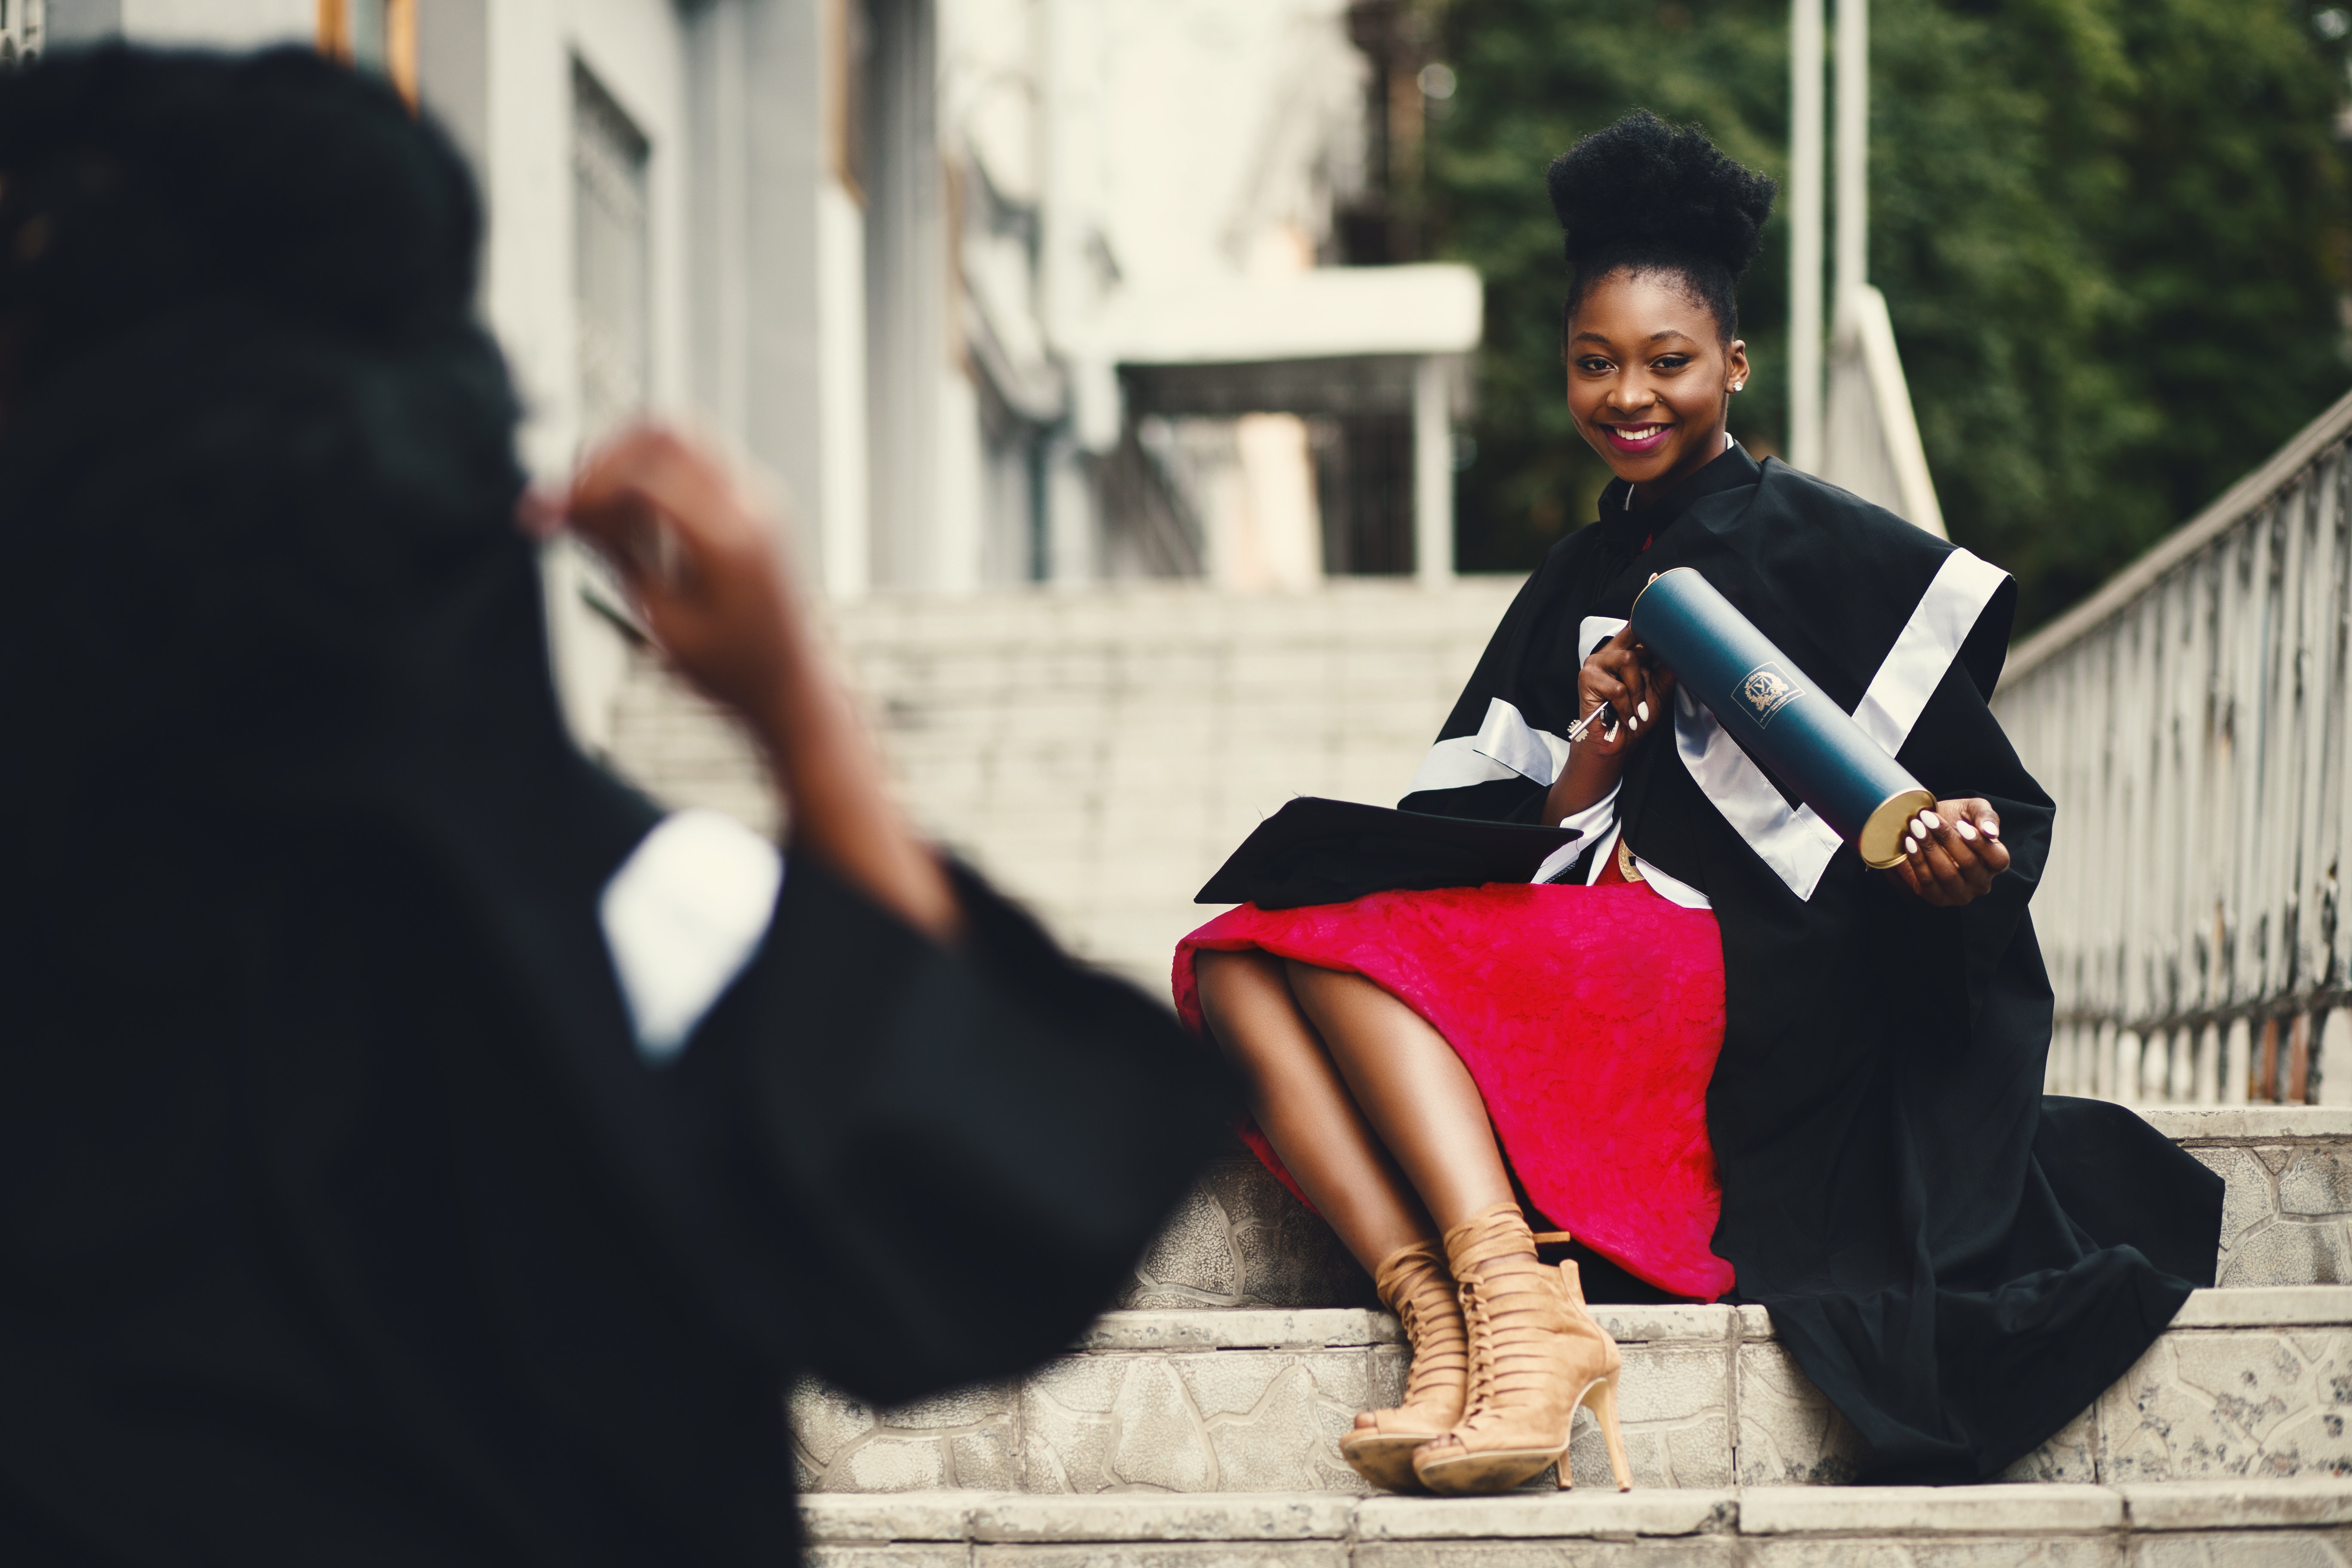 A young Black woman sitting on the steps of a building posing with a college degree.